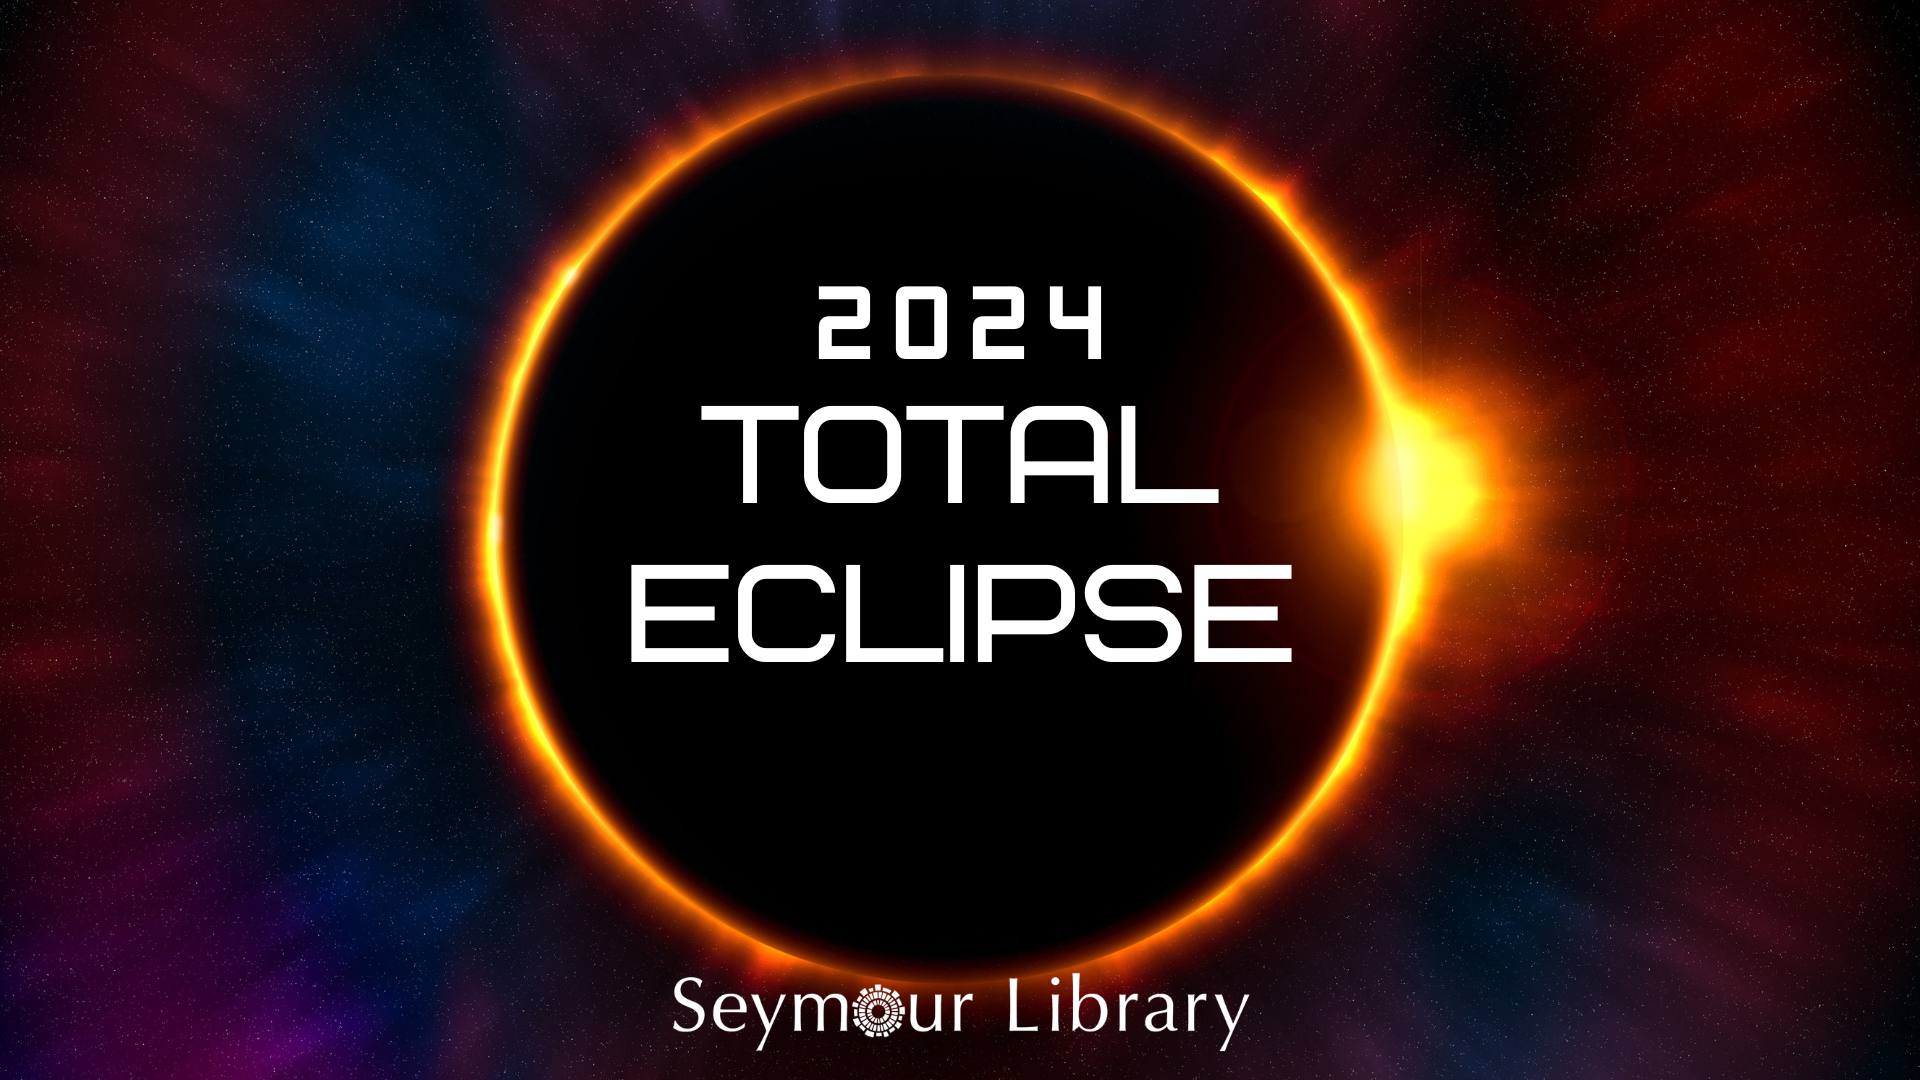 2024 Total Eclipse --image featuring an eclipse in space with the sun behind the moon and a Seymour Library logo at the bottom